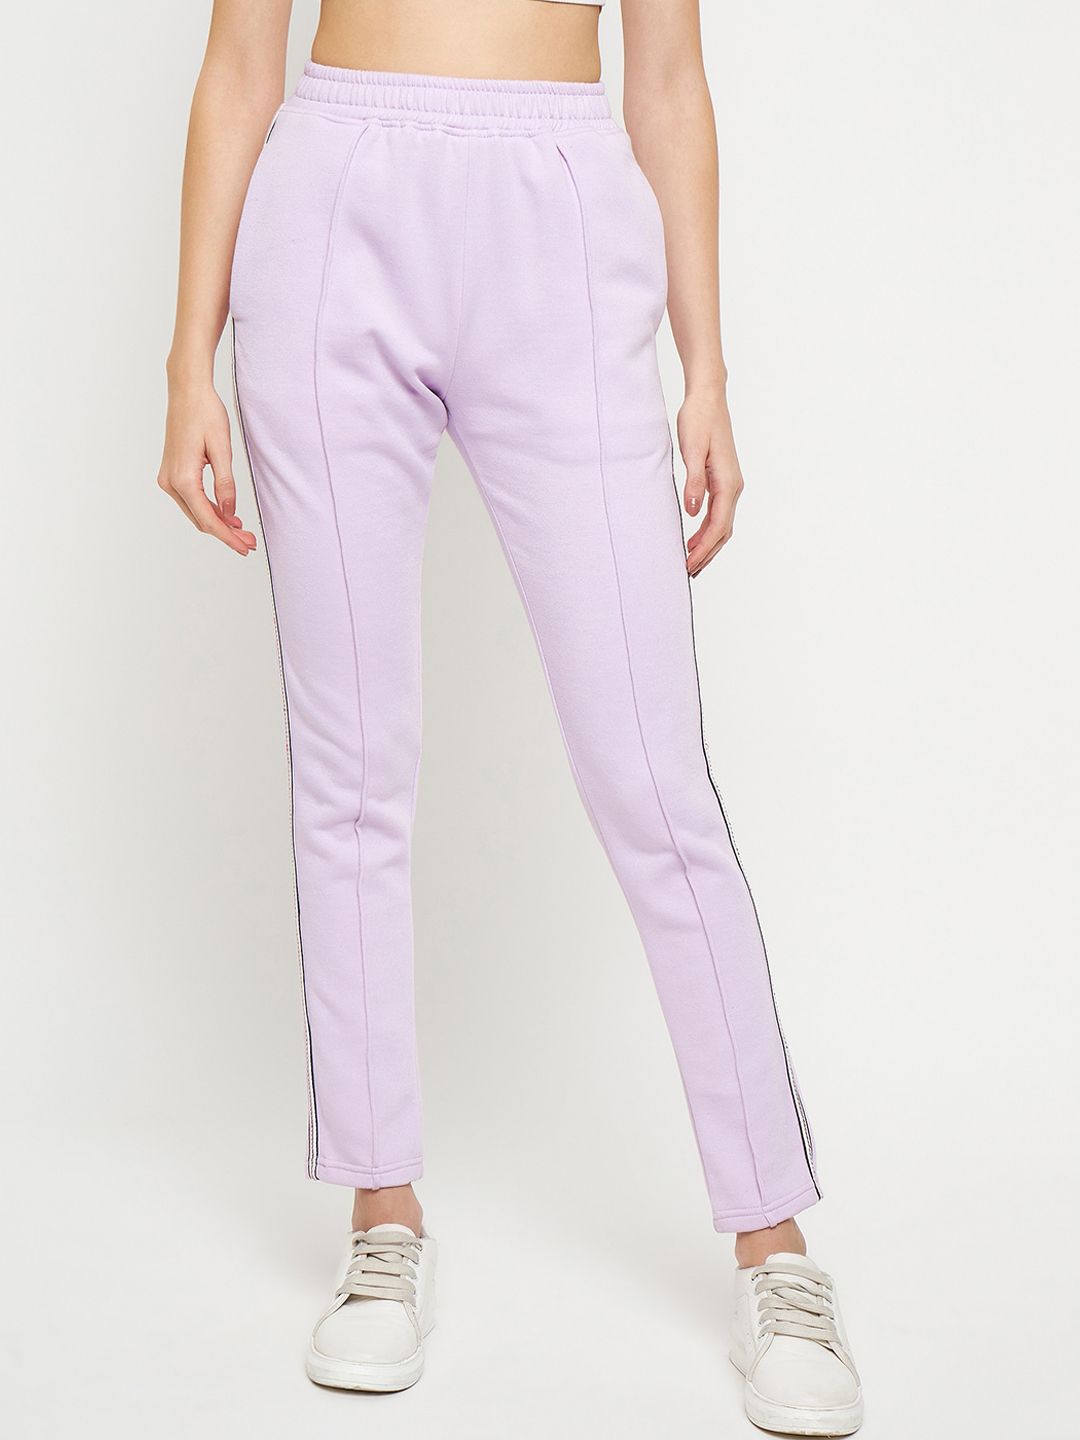 BRINNS Women Lavender Slim Fit Pleated Trousers Price in India